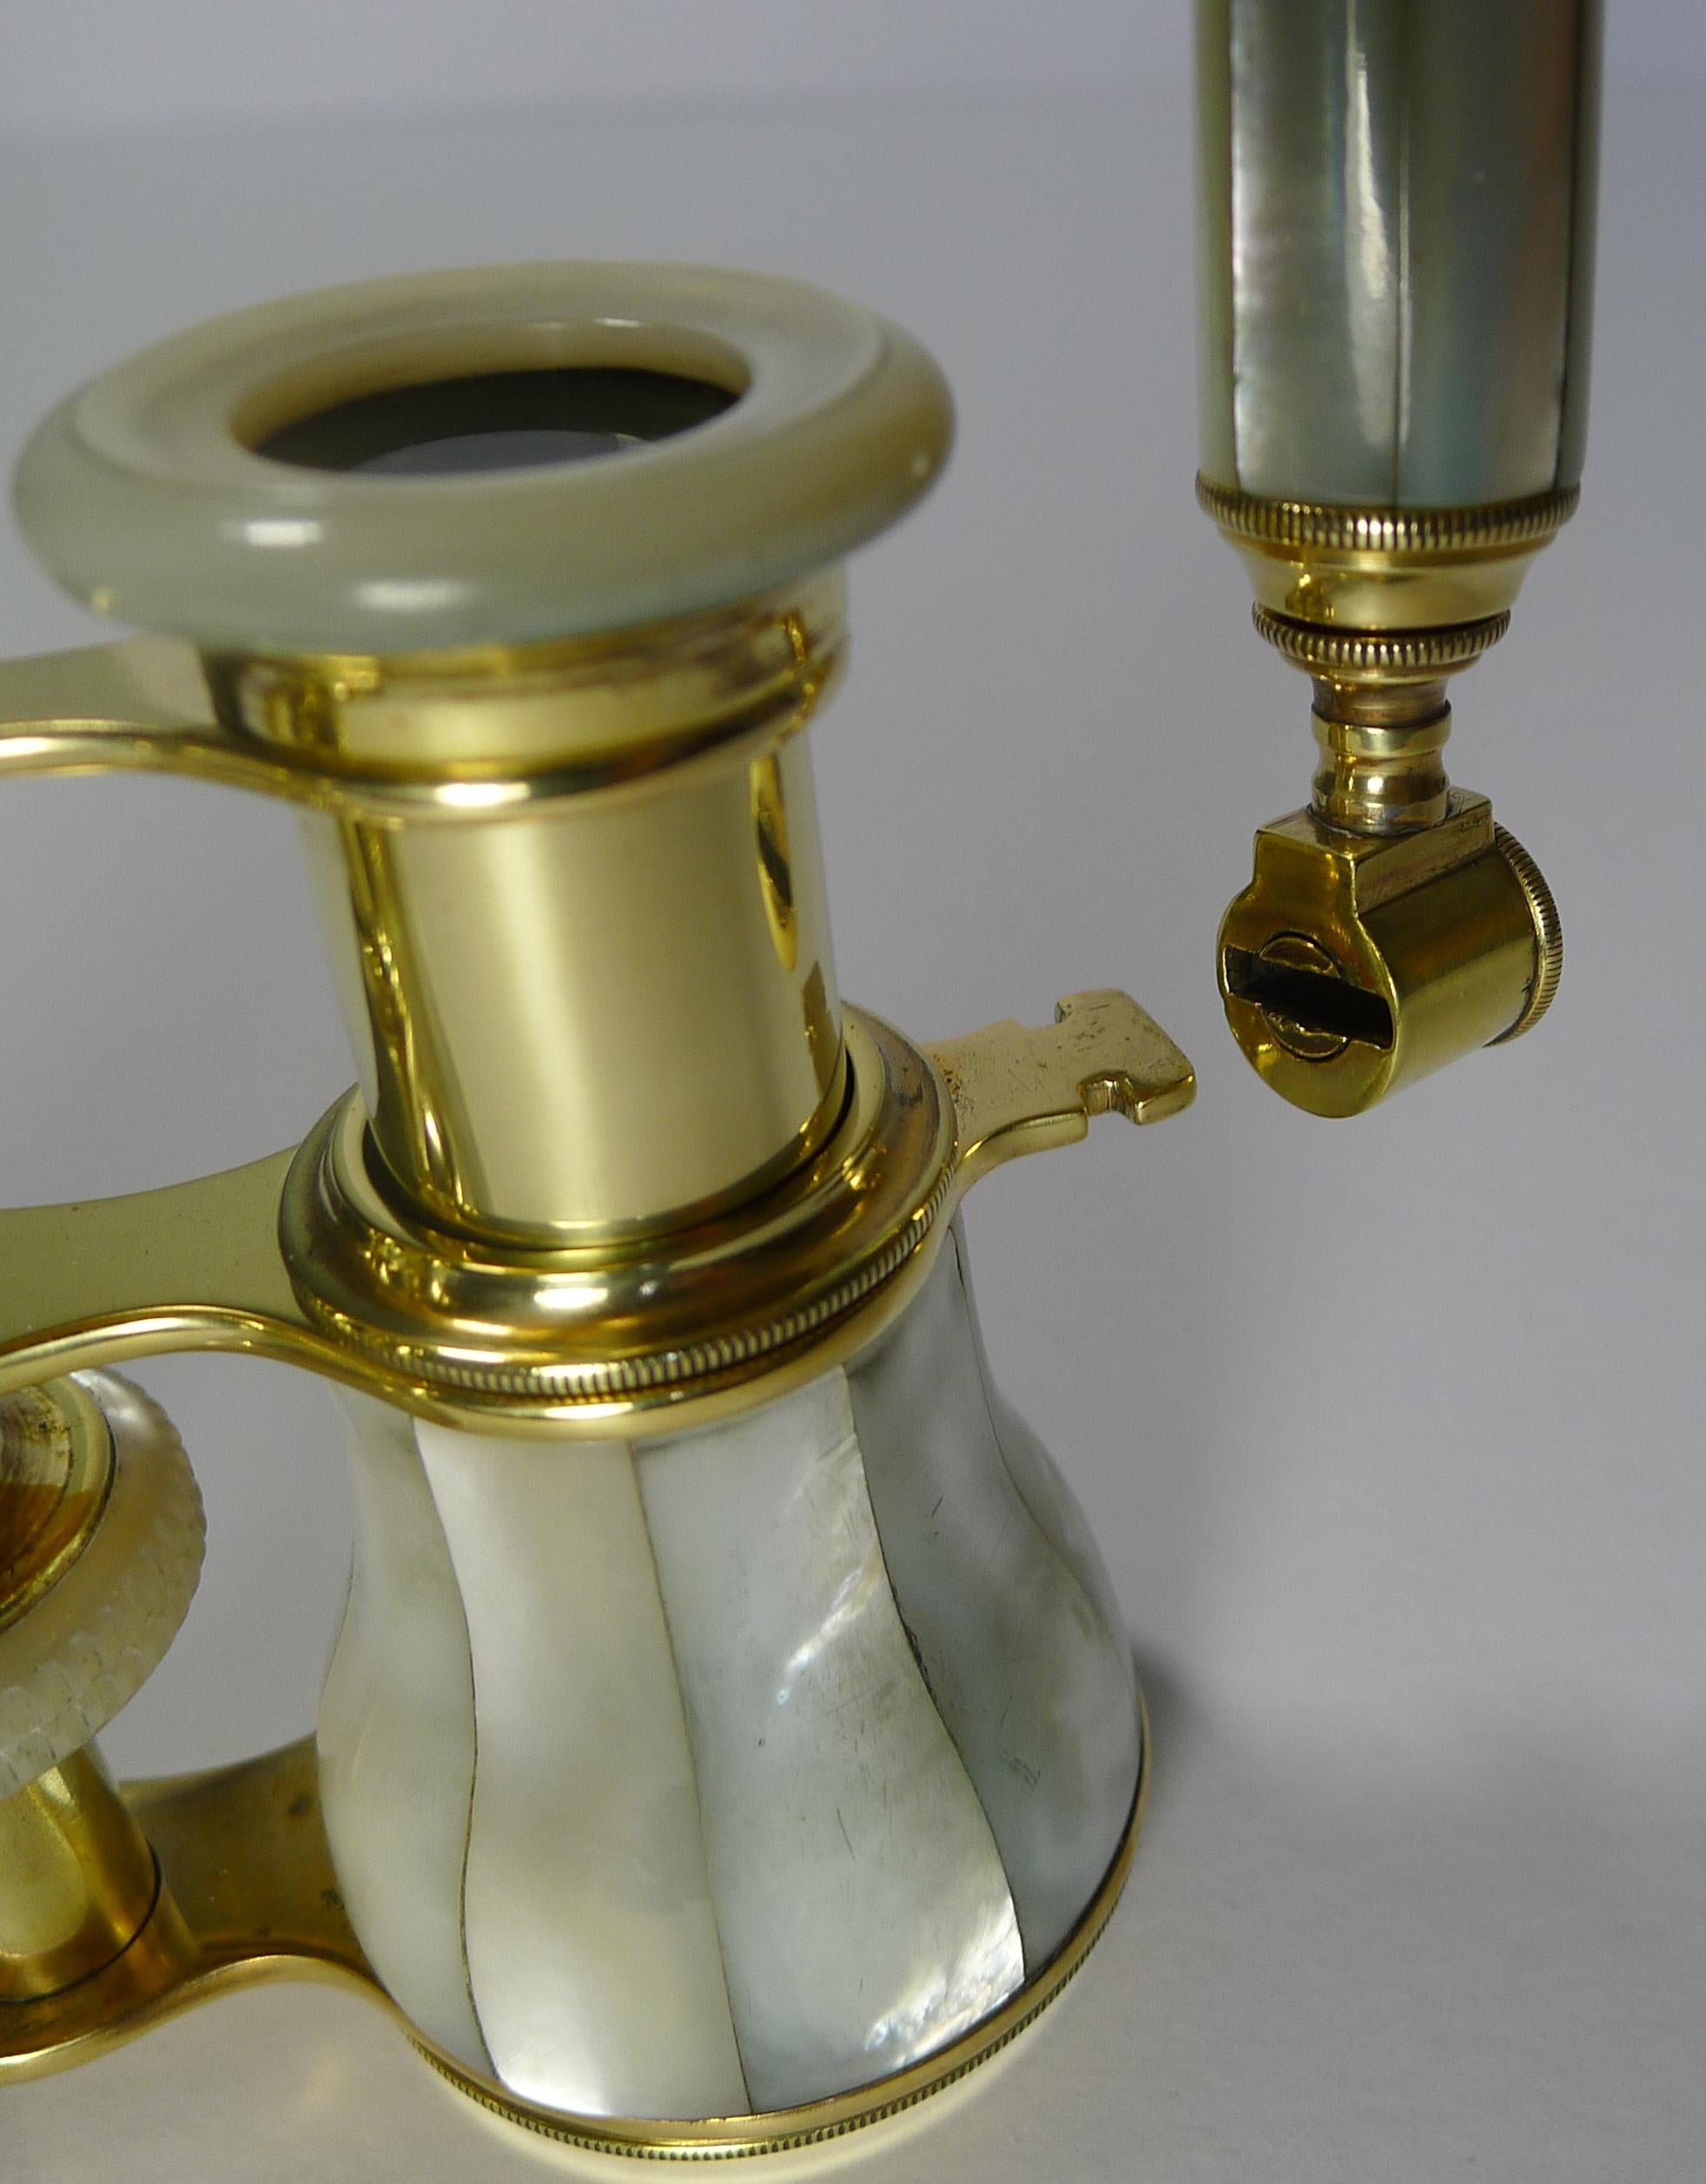 A wonderful and most unusual pair of antique French opera glasses dating to circa 1900 made from polished brass and bright mother of pearl shell.

The telescopic handle is what makes these a rare and unusual find, the handle when pushed in can be